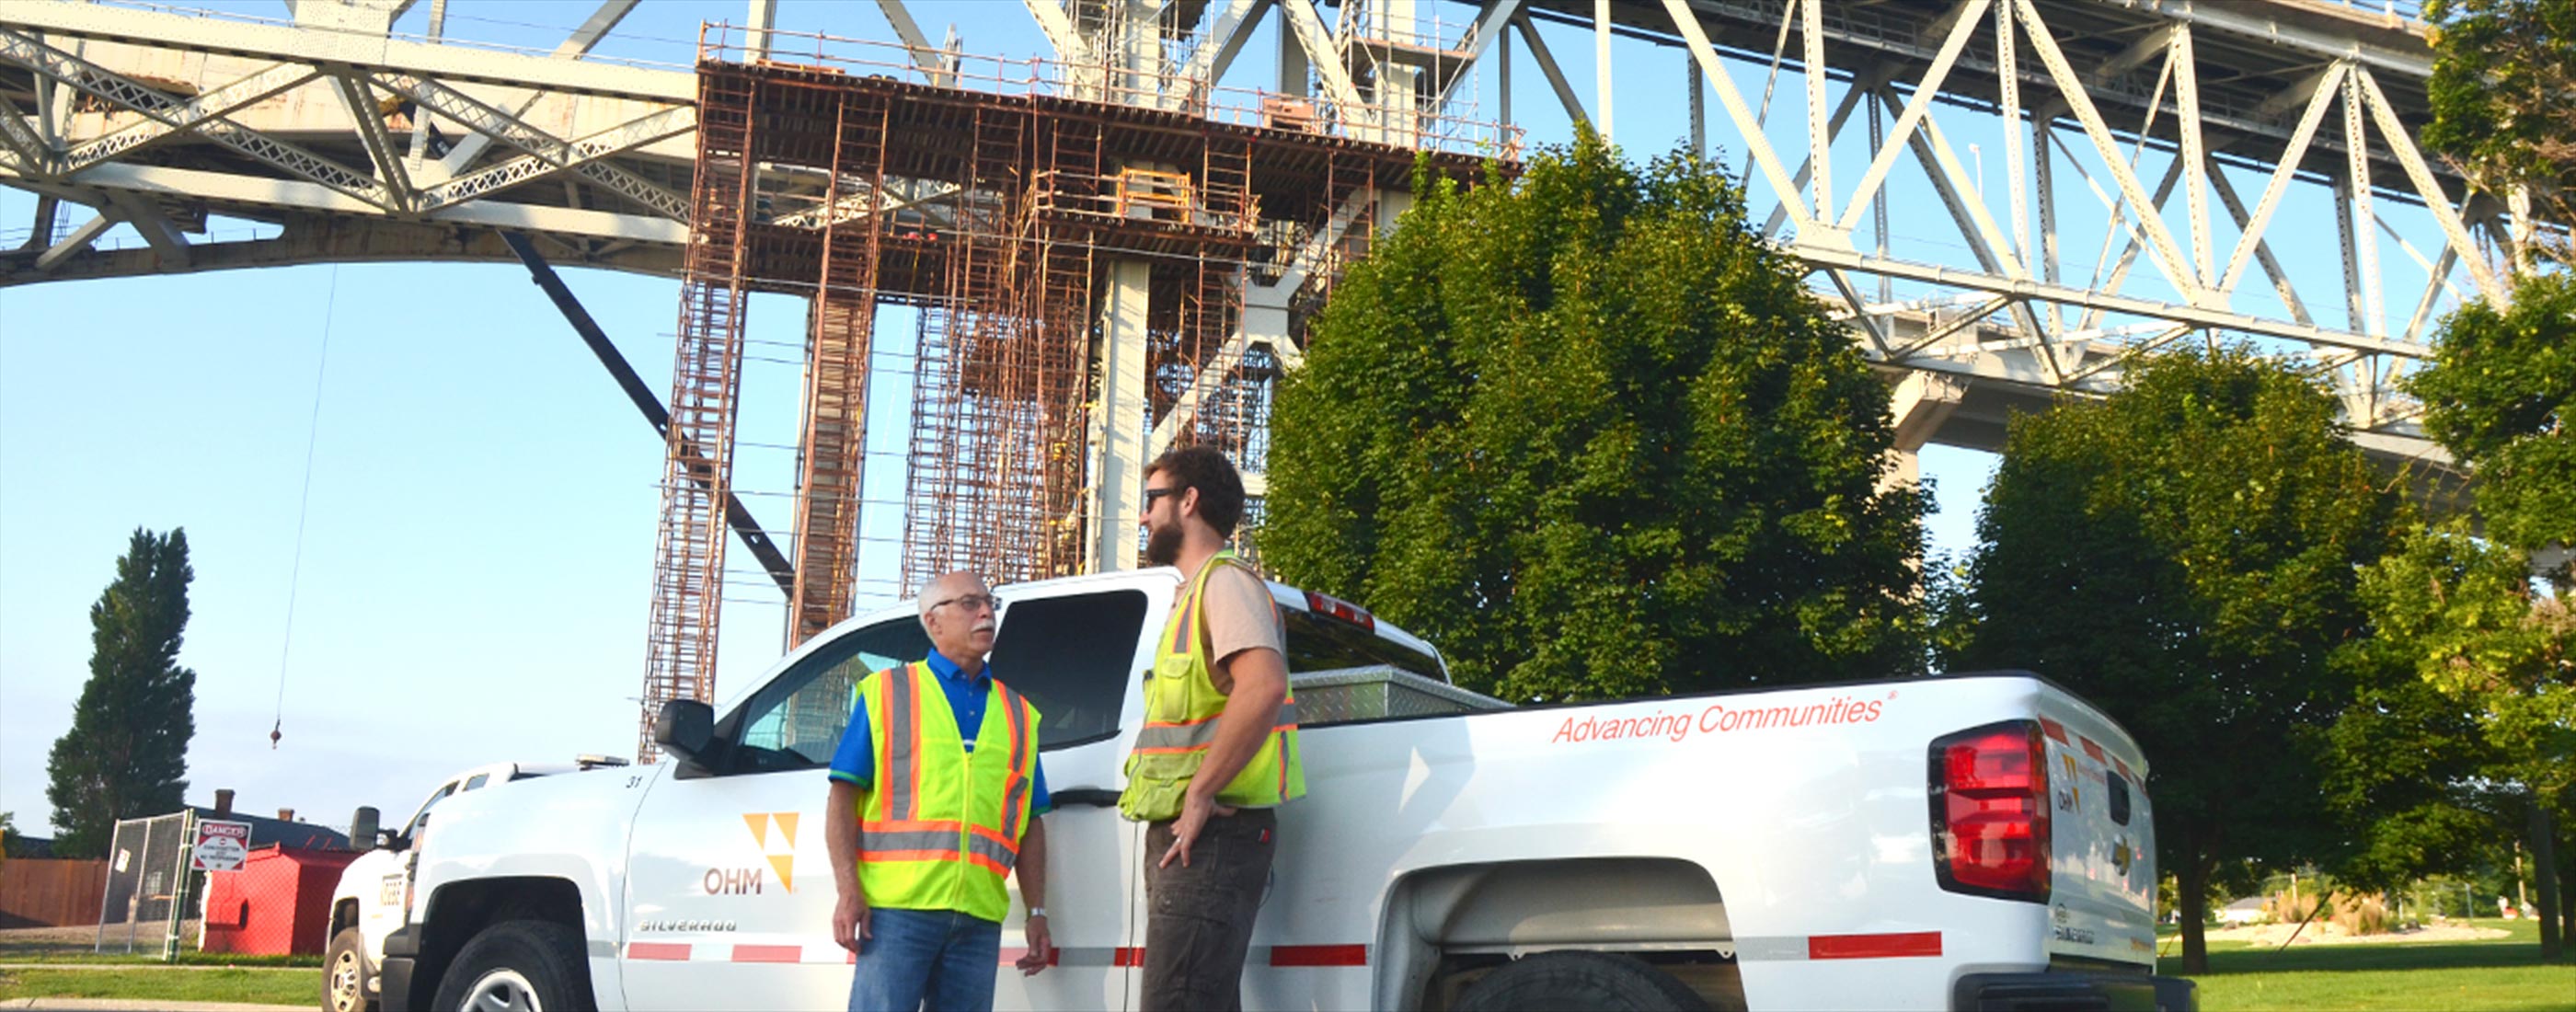 OHM Advisors’ construction engineers on-site during the Blue Water Bridge preservation.